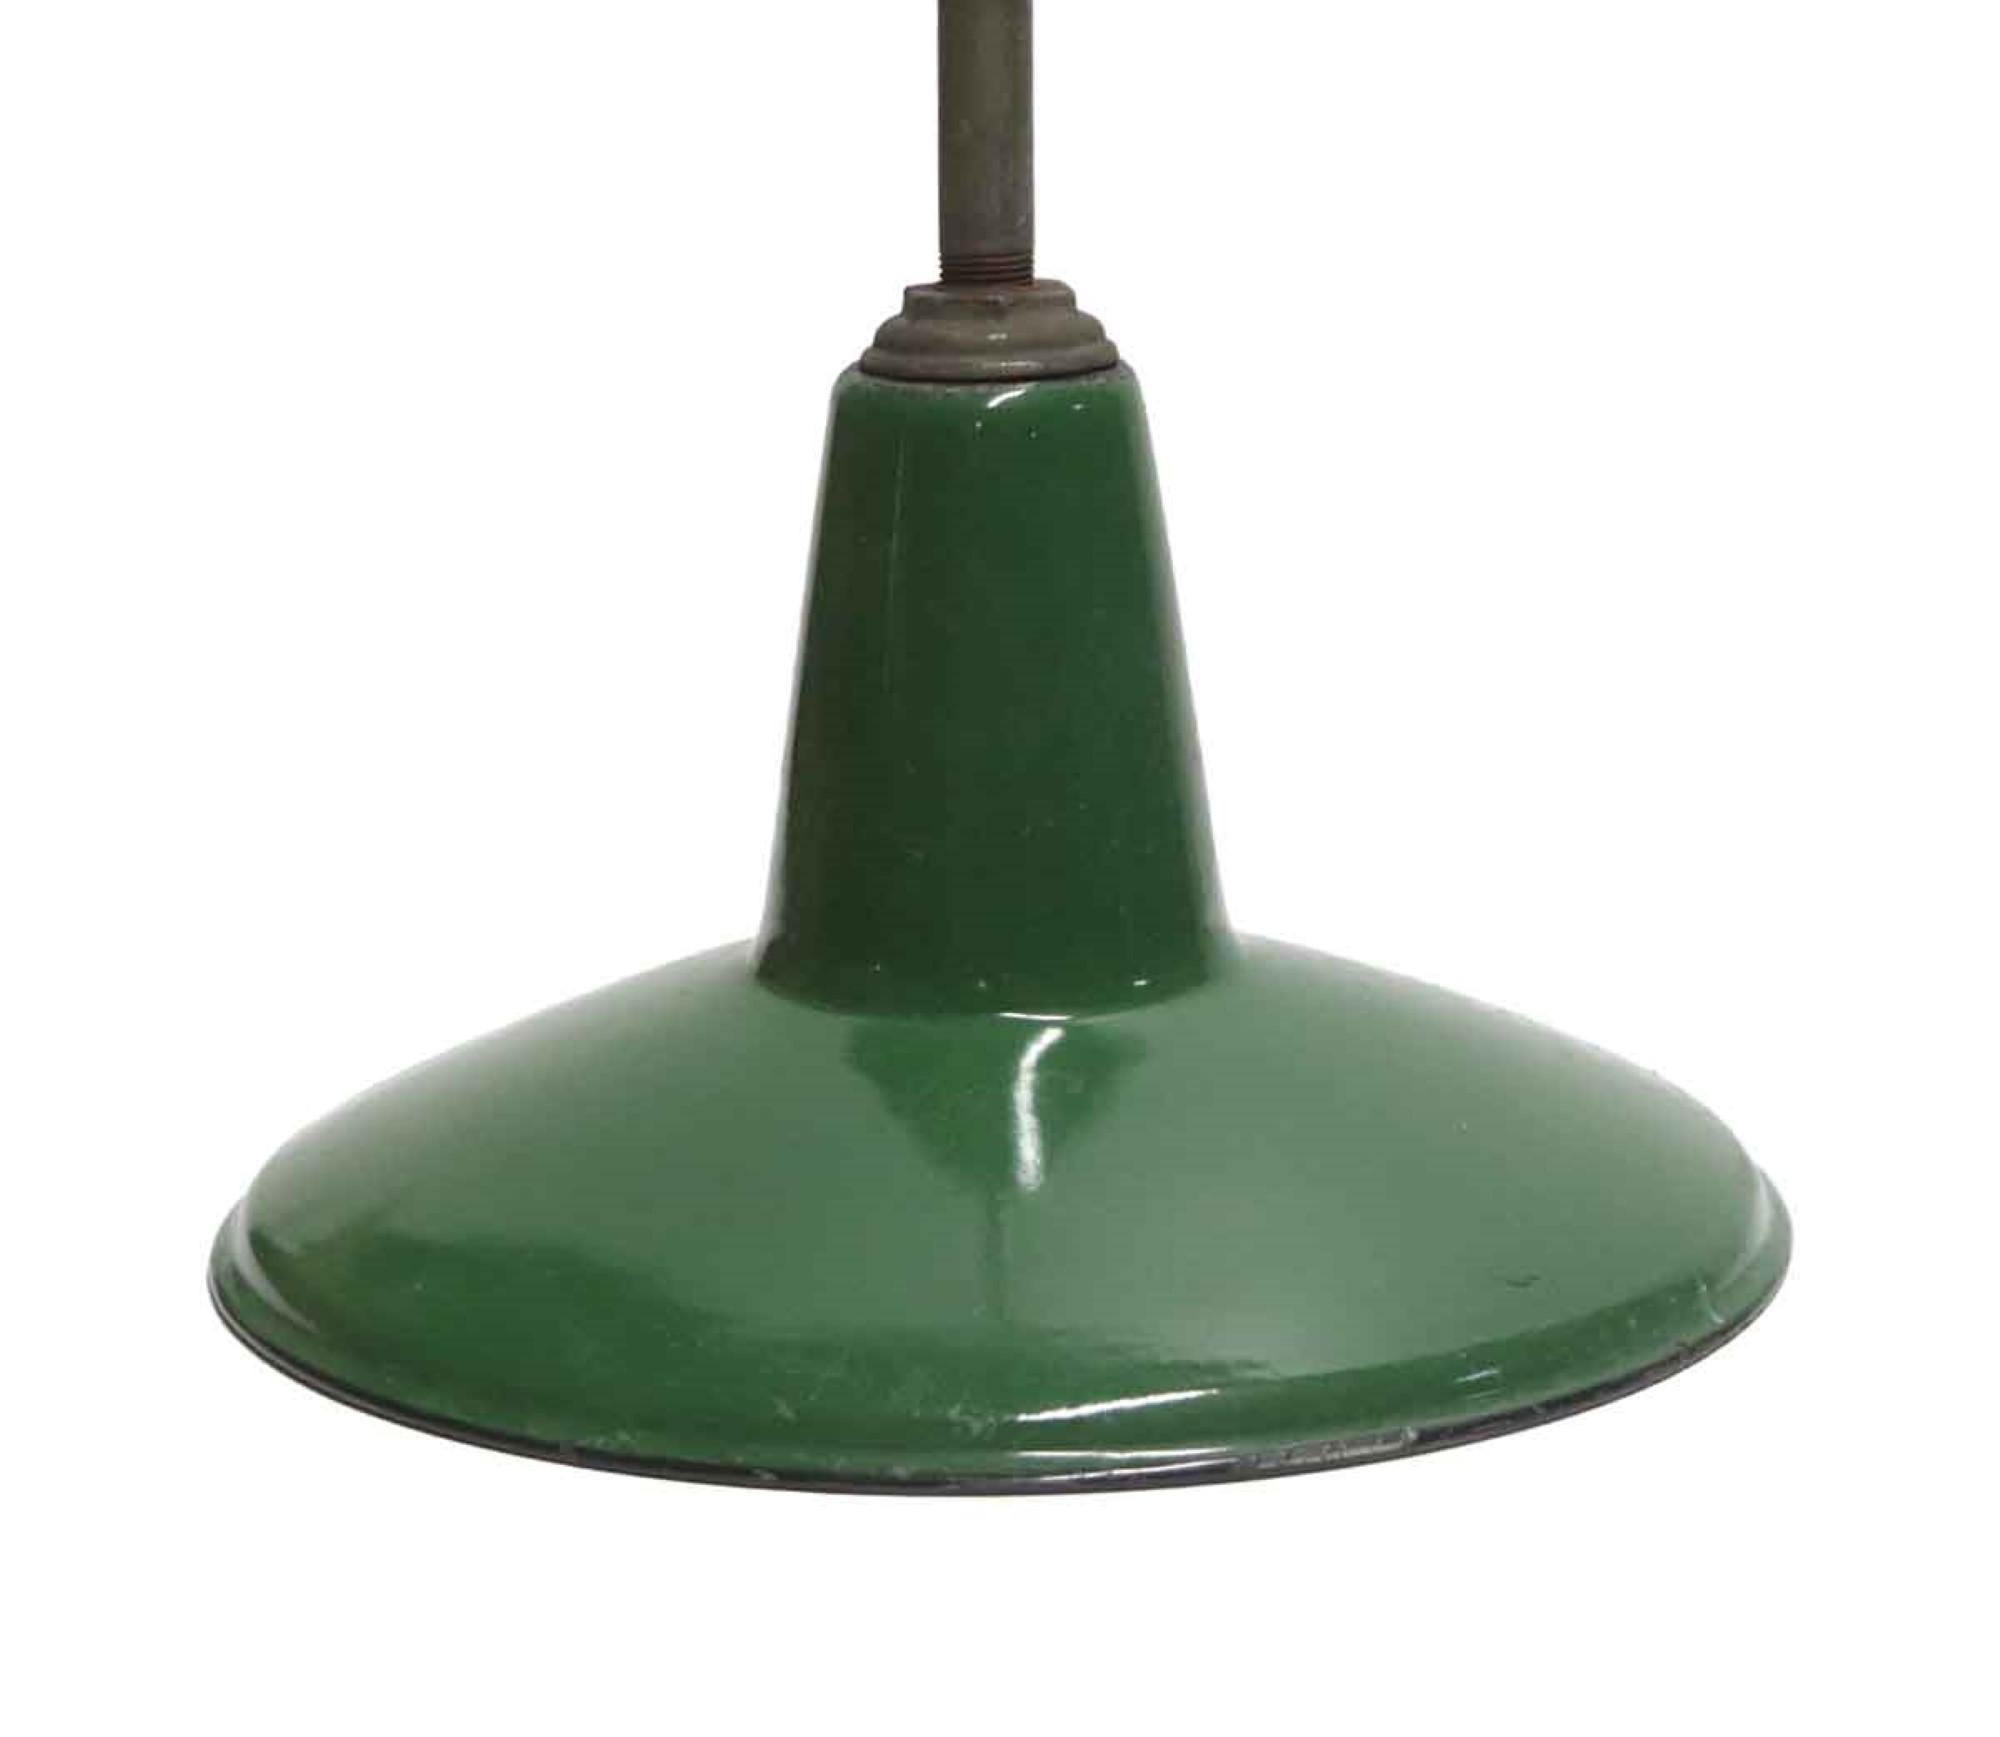 1970s green and white enameled steel Industrial pendant light. Price includes cleaning and rewiring. Small quantity available at time of posting. Please inquire. Priced each. This can be seen at our 400 Gilligan St location in Scranton, PA.